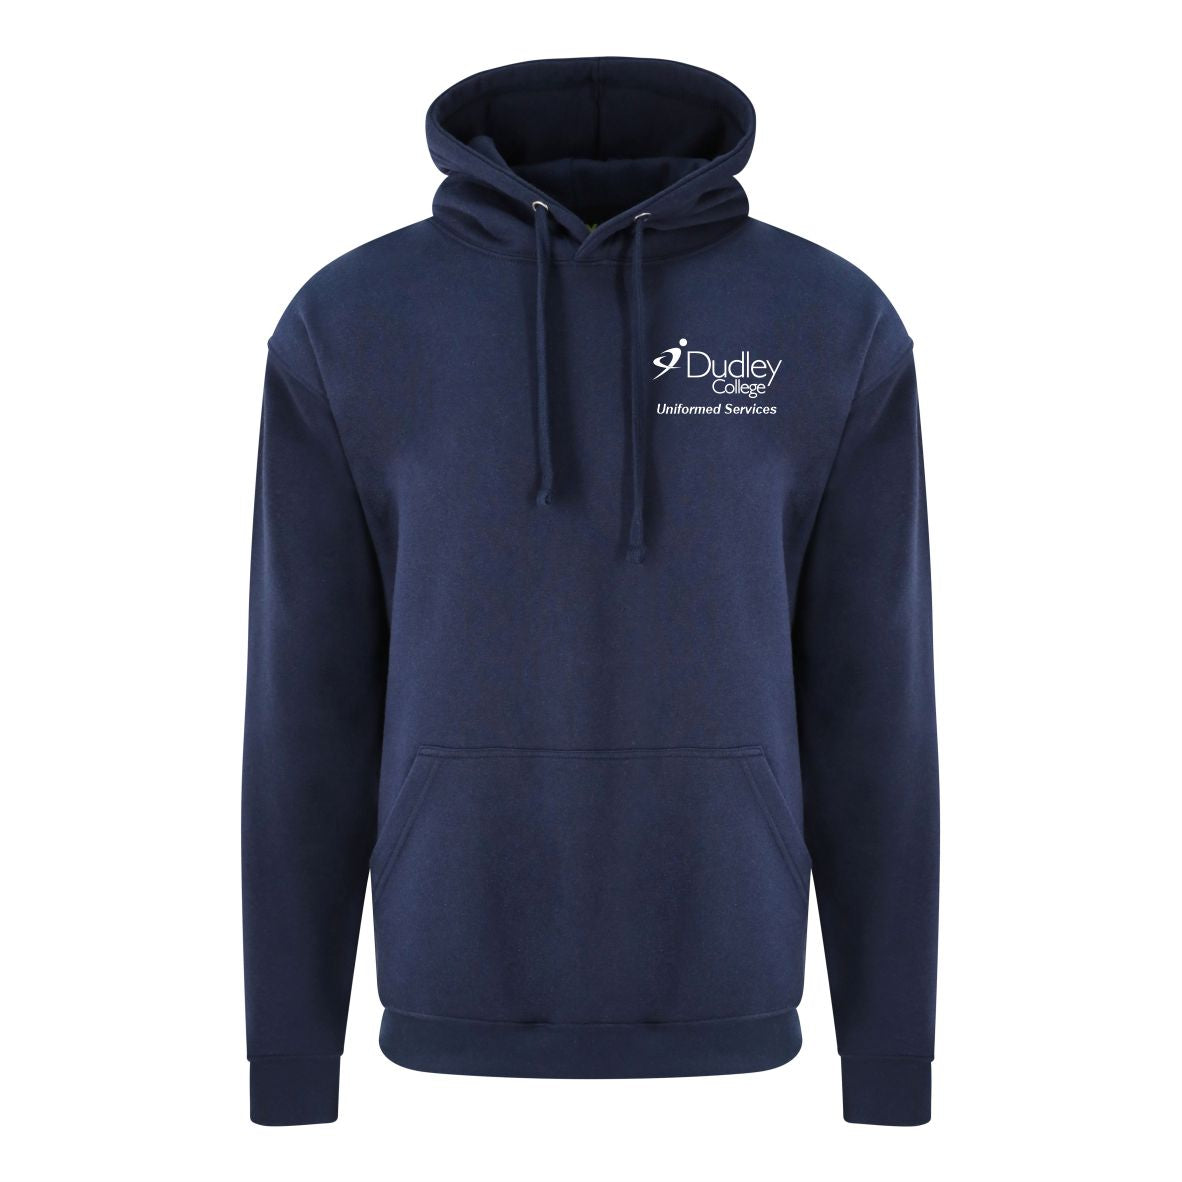 Dudley College Uniformed Services - Hoodie [JH001]